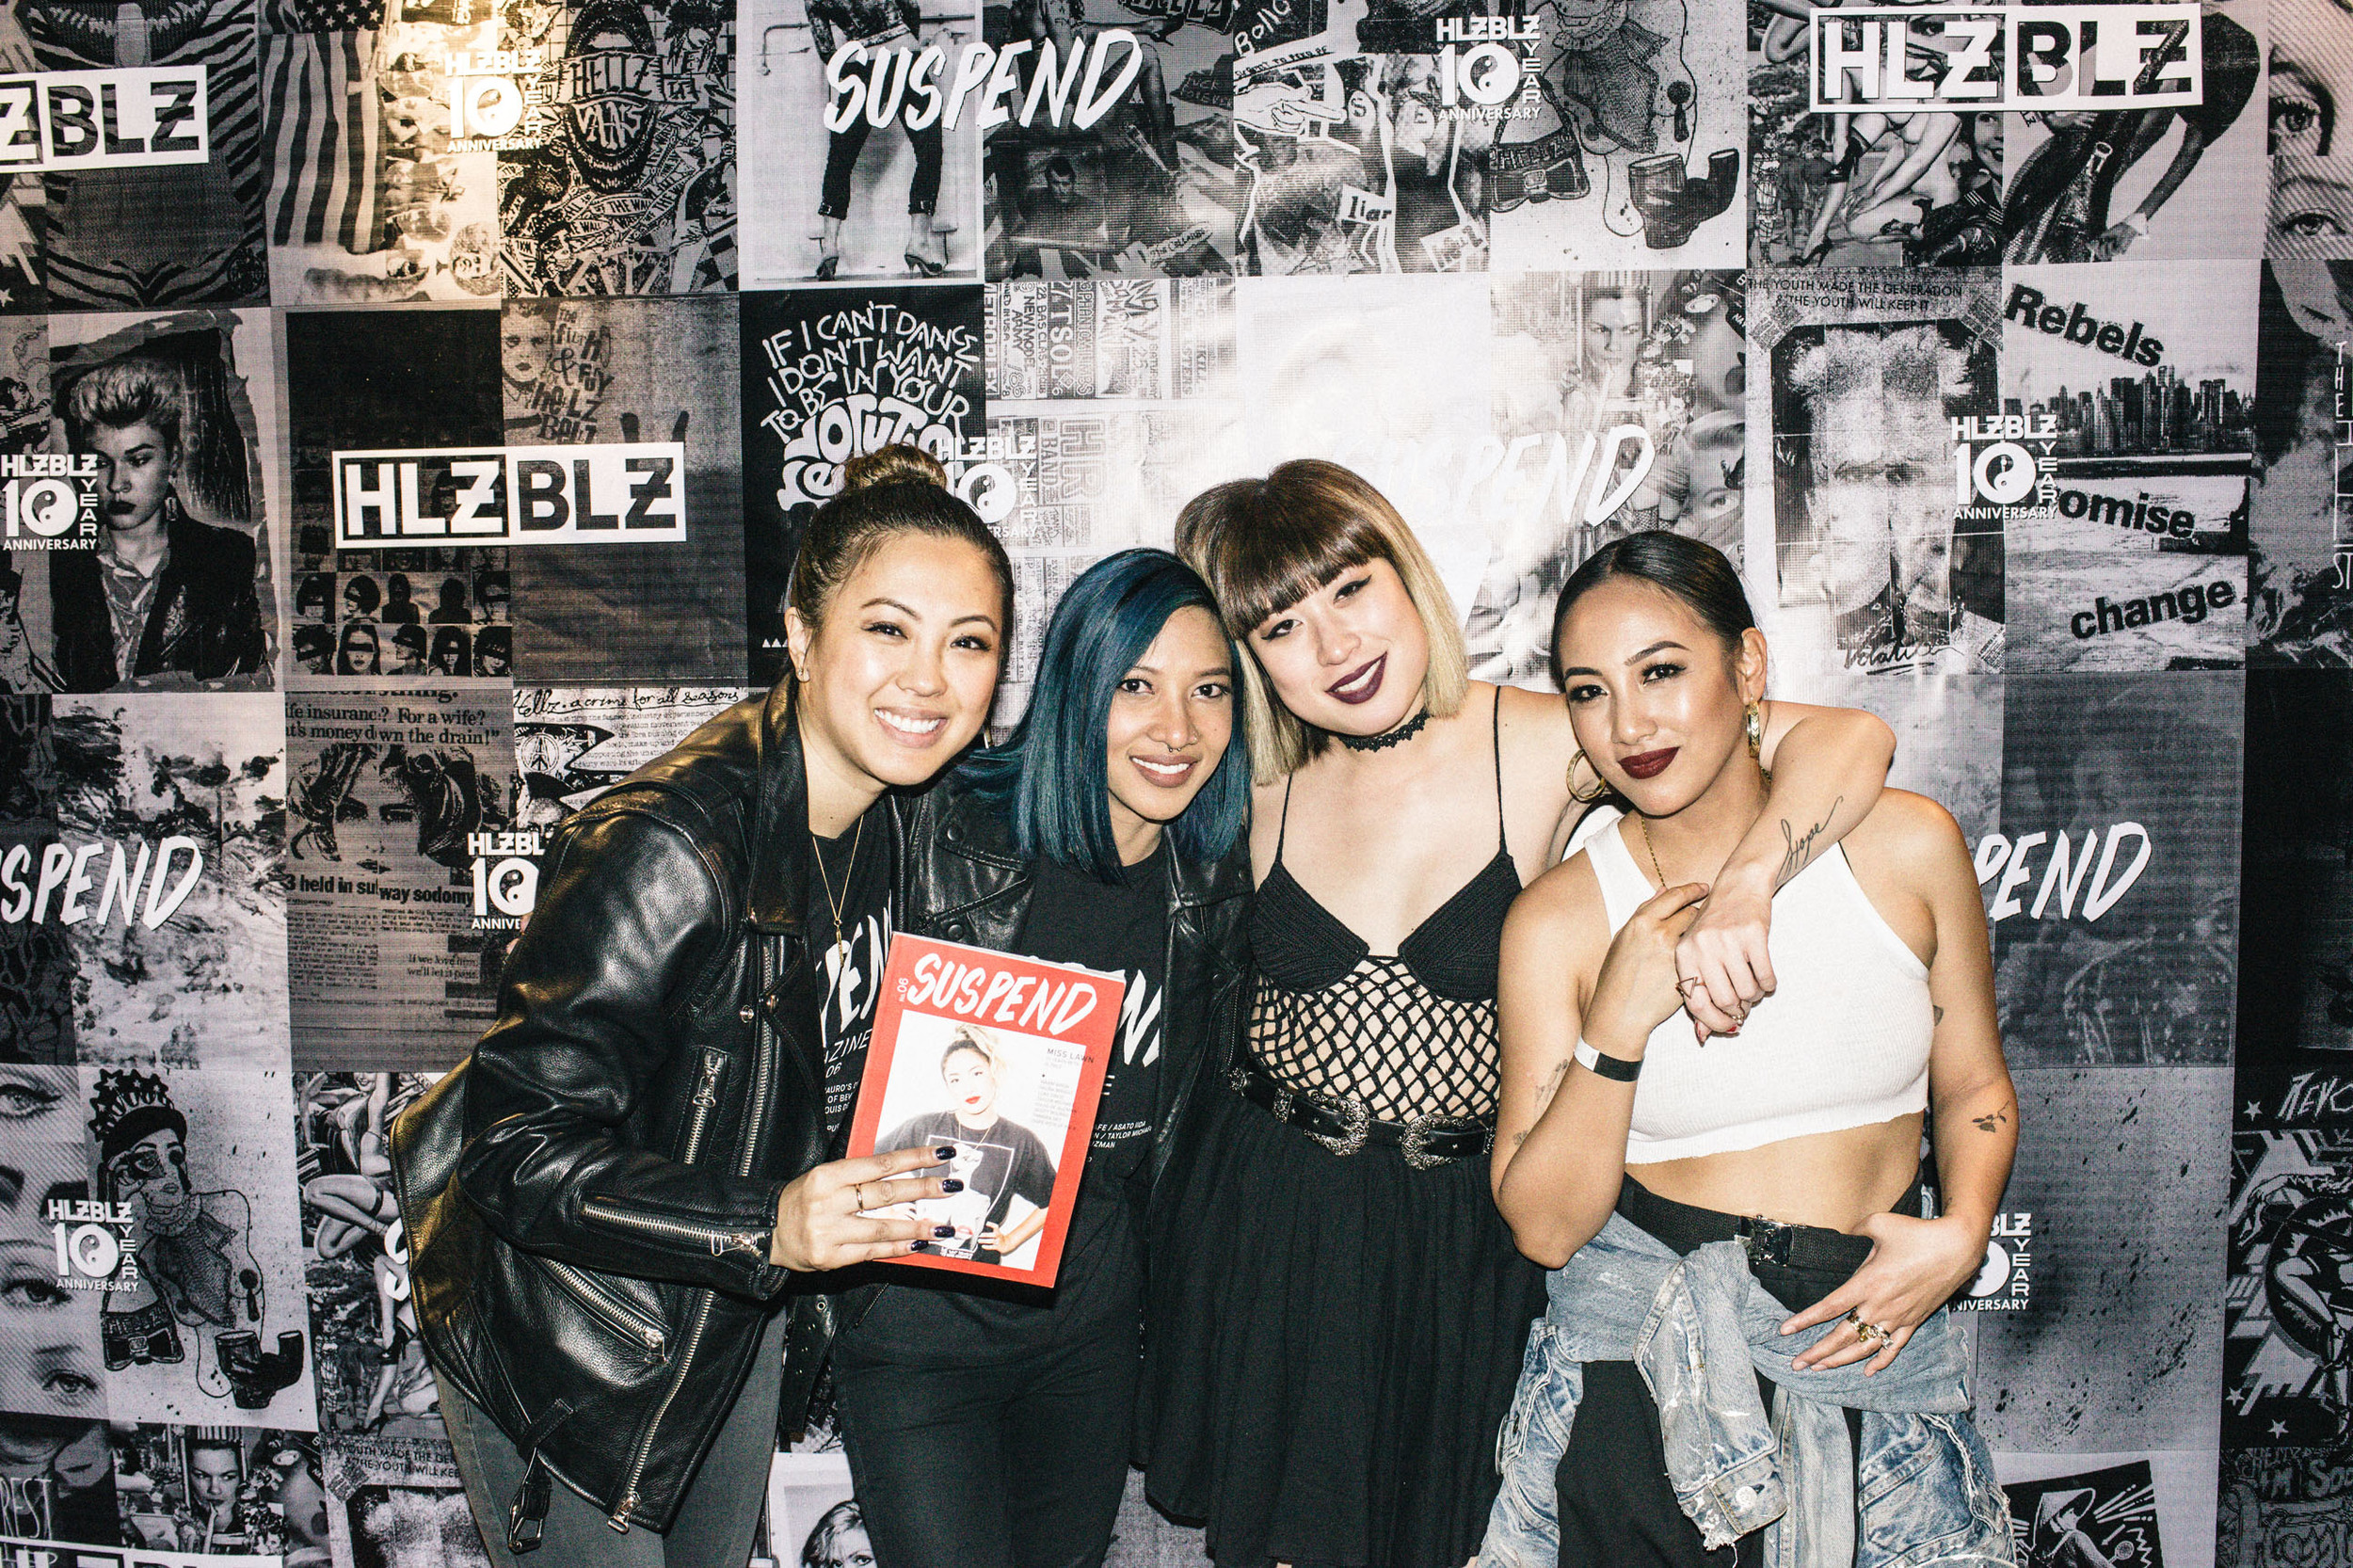  Miss Lawn with Nicole Phung and EIC Diane Abapo and Fashion Editor Leslie Corpuz of SUSPEND at the ISSUE 06 Release Party x 10YR HLZBLZ Anniversary (Feb 11) at Globe Theater. / Photo: © Jonathan Tate for SUSPEND Magazine. 